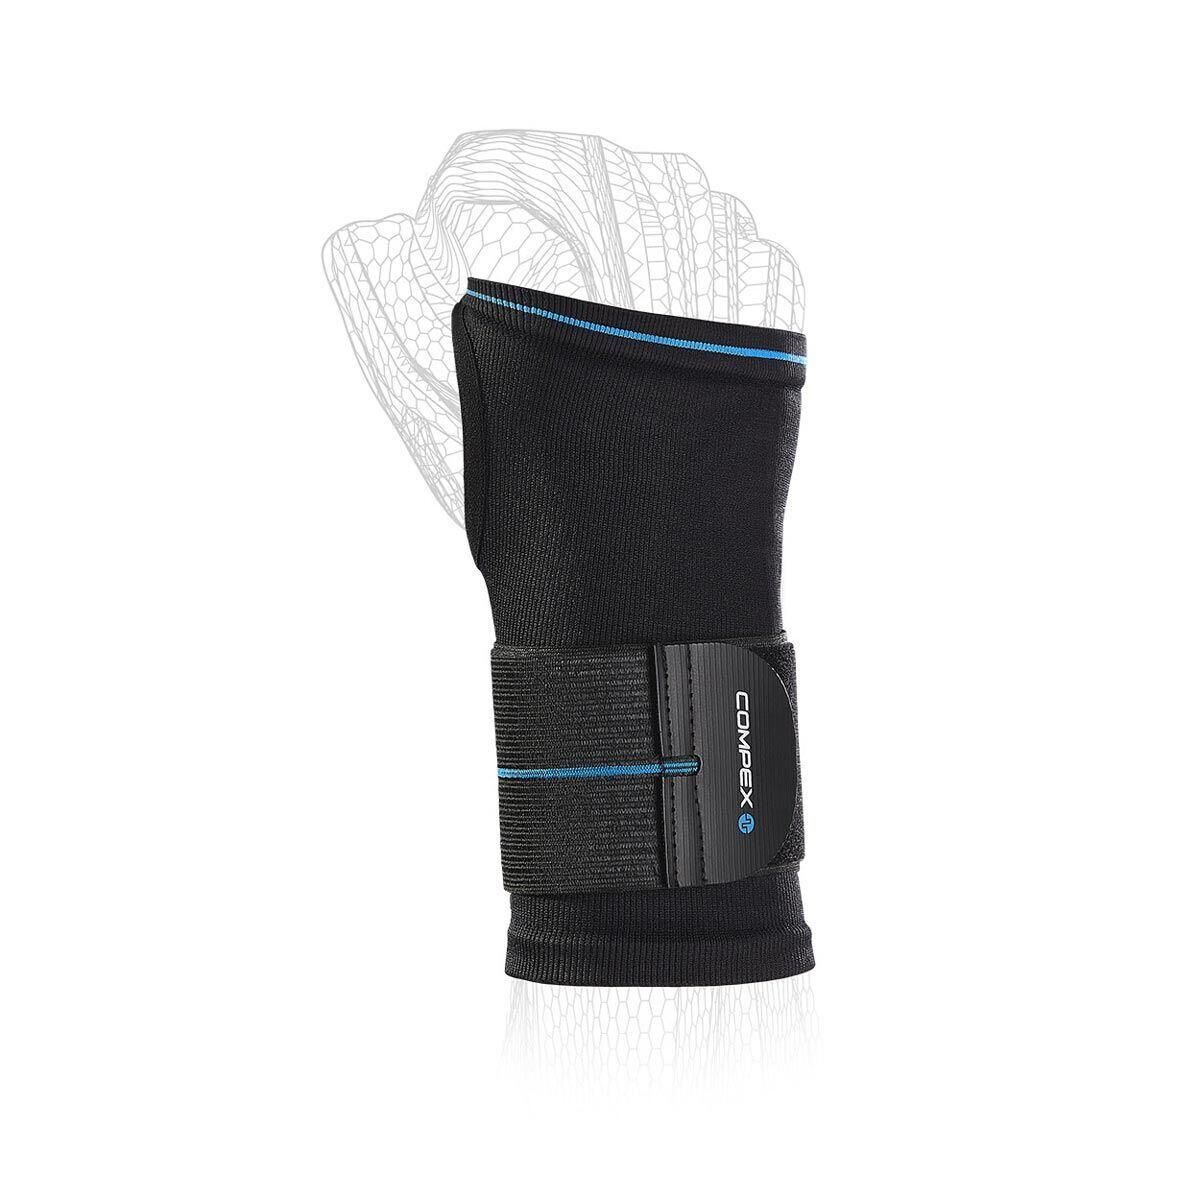 COMPEX COMPEX ACTIV' WRIST+ compression support with thumb opening